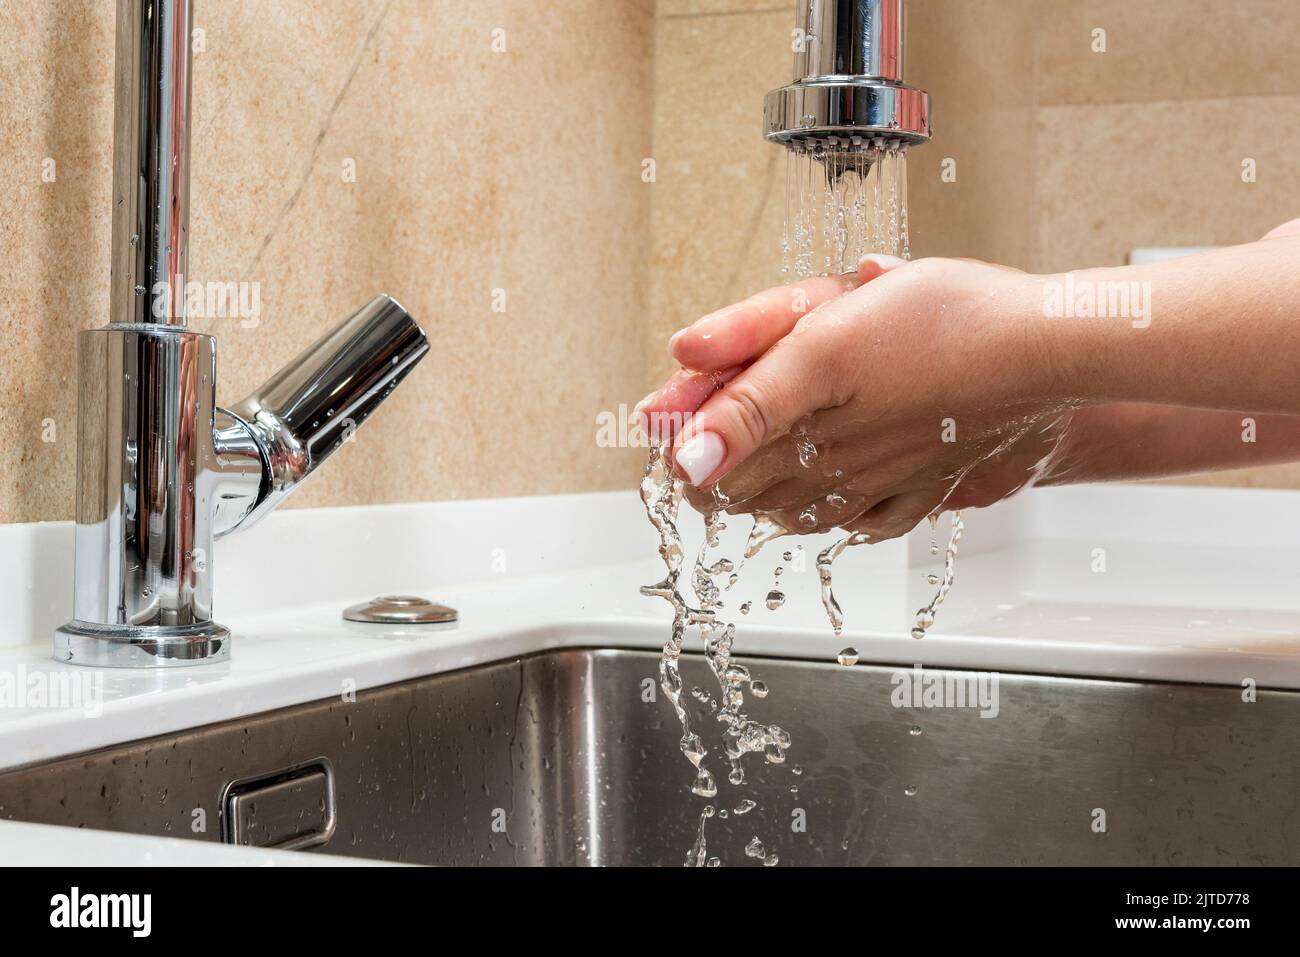 Girl washes her hands under drops of water over the sink Stock Photo